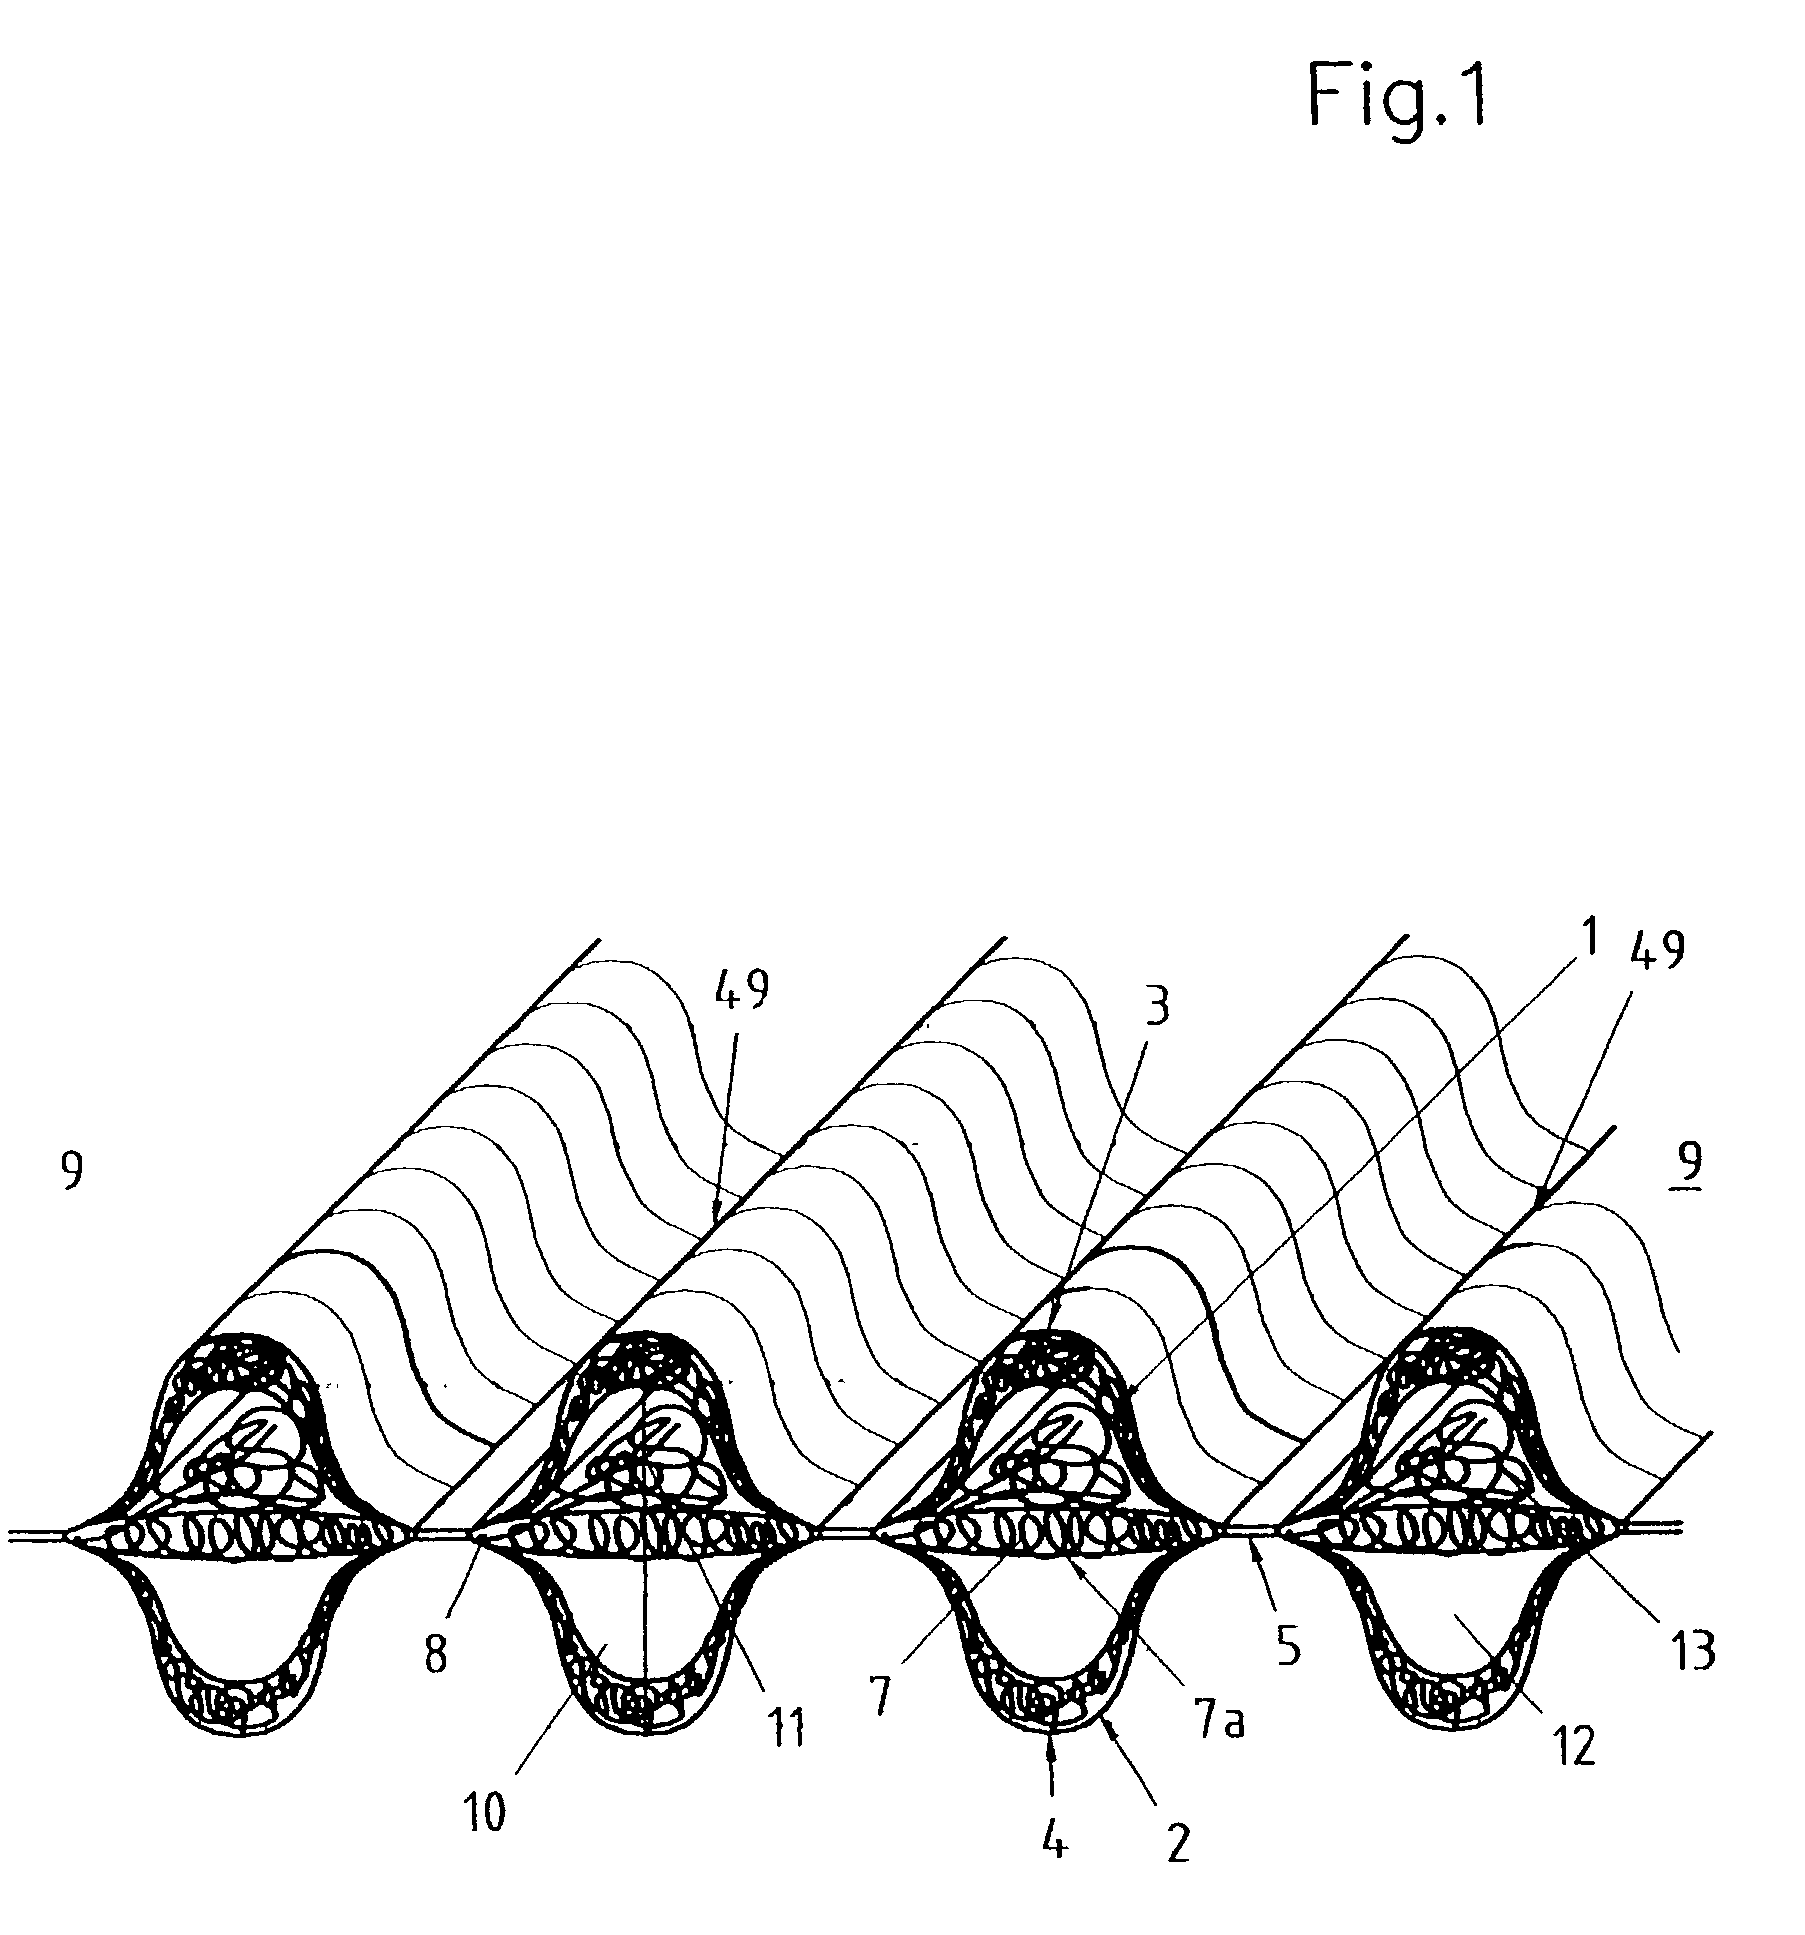 Regularly structured nonwoven fabrics, method for their manufacture, and their use